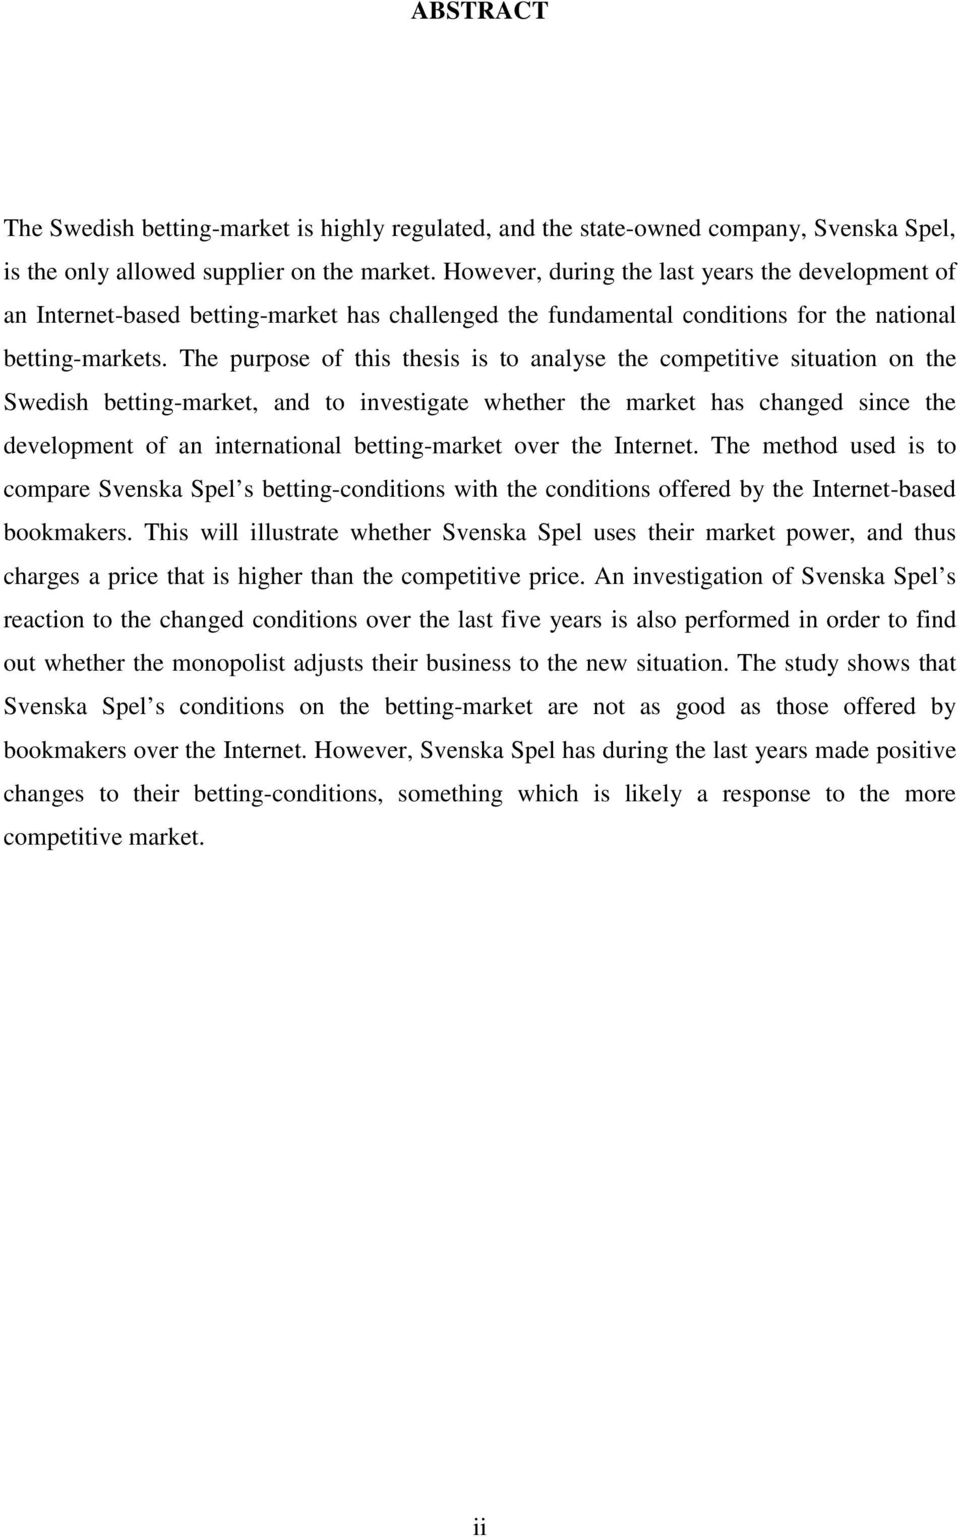 The purpose of this thesis is to analyse the competitive situation on the Swedish betting-market, and to investigate whether the market has changed since the development of an international